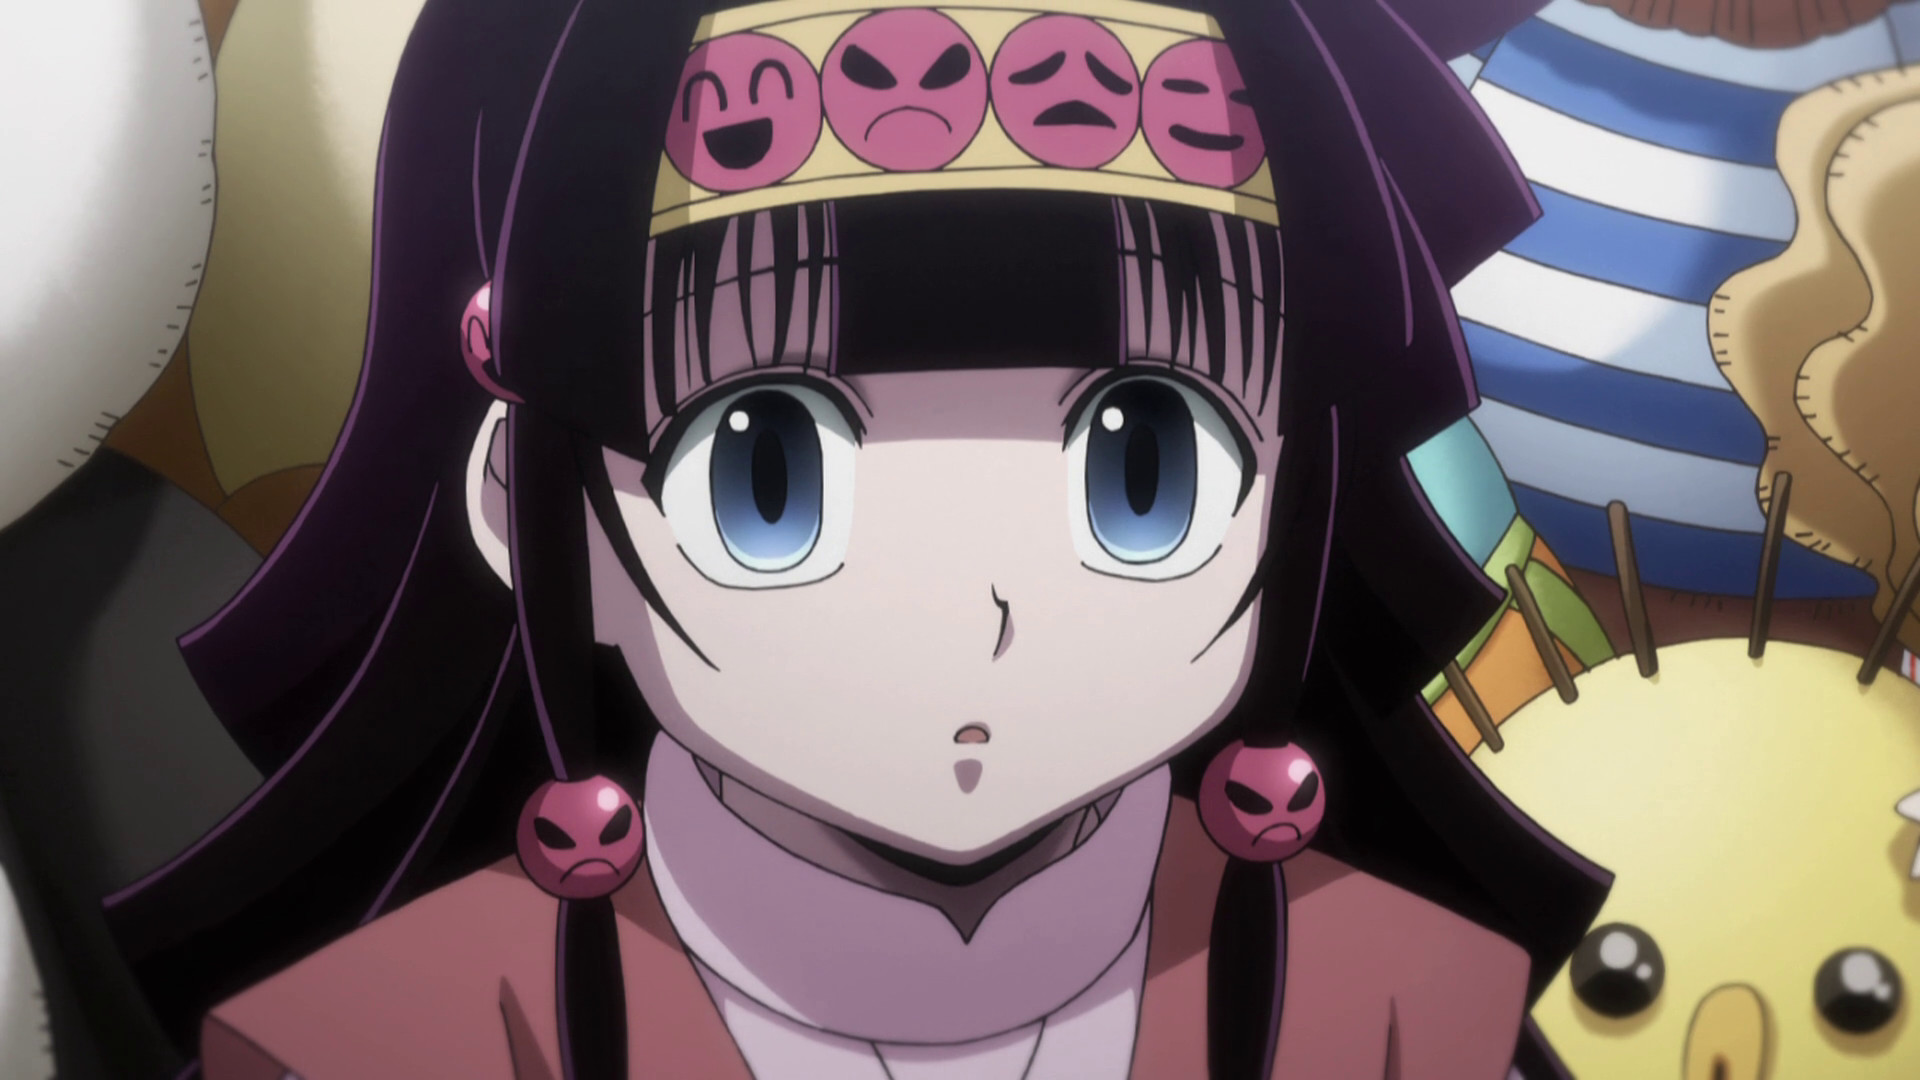 1920x1080 Alluka zoldyck images Alluka HD wallpaper and background photos